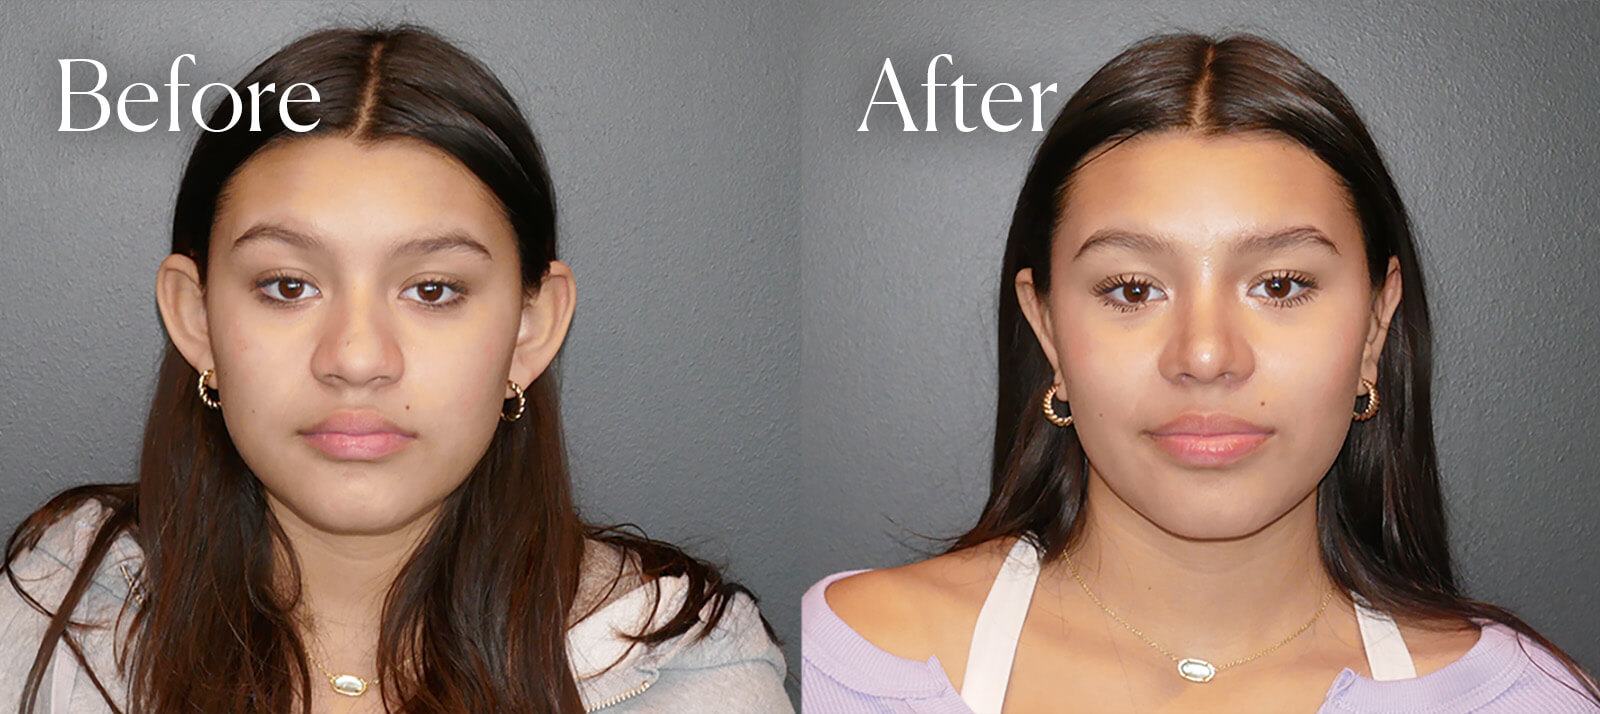 otoplasty before and after